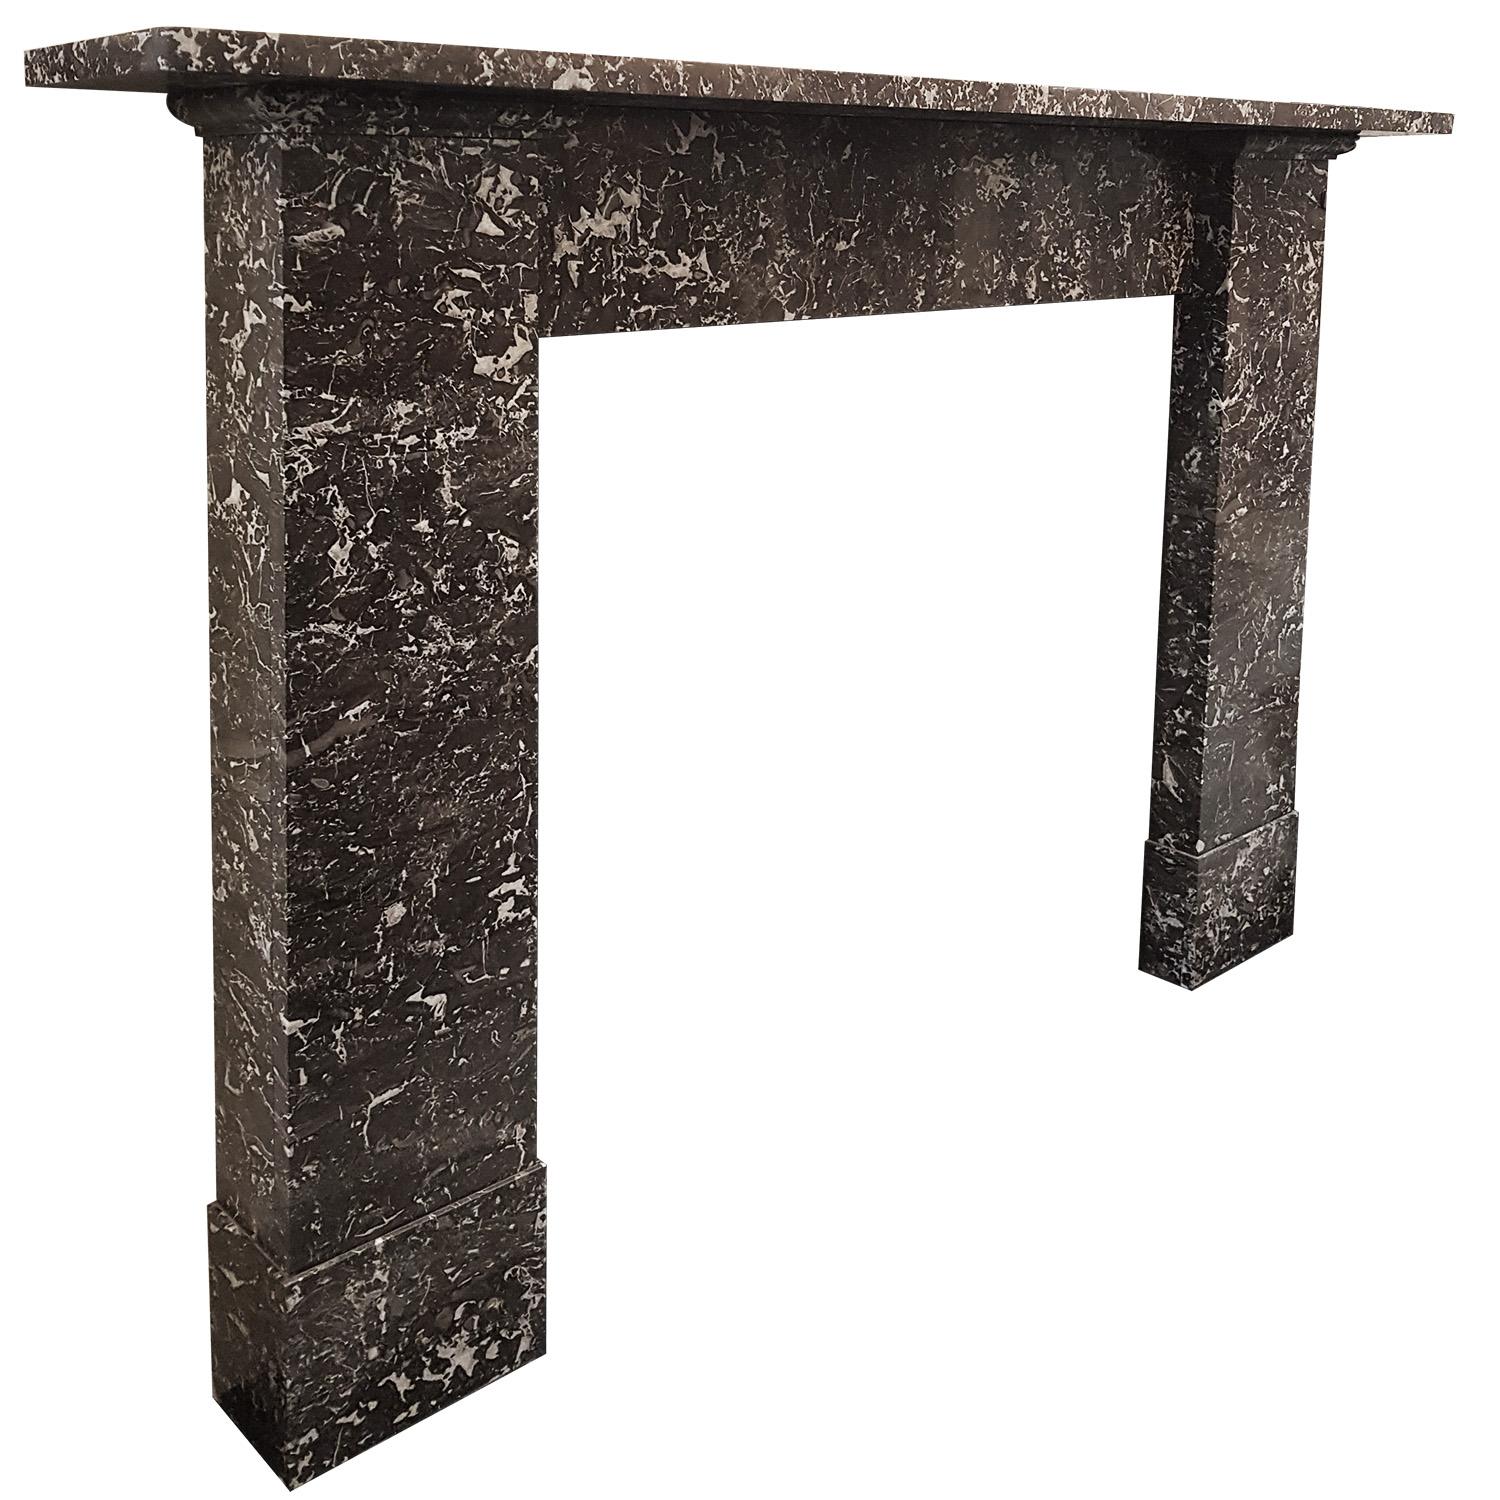 Saint Anne Marble Fireplace Mantel For Sale